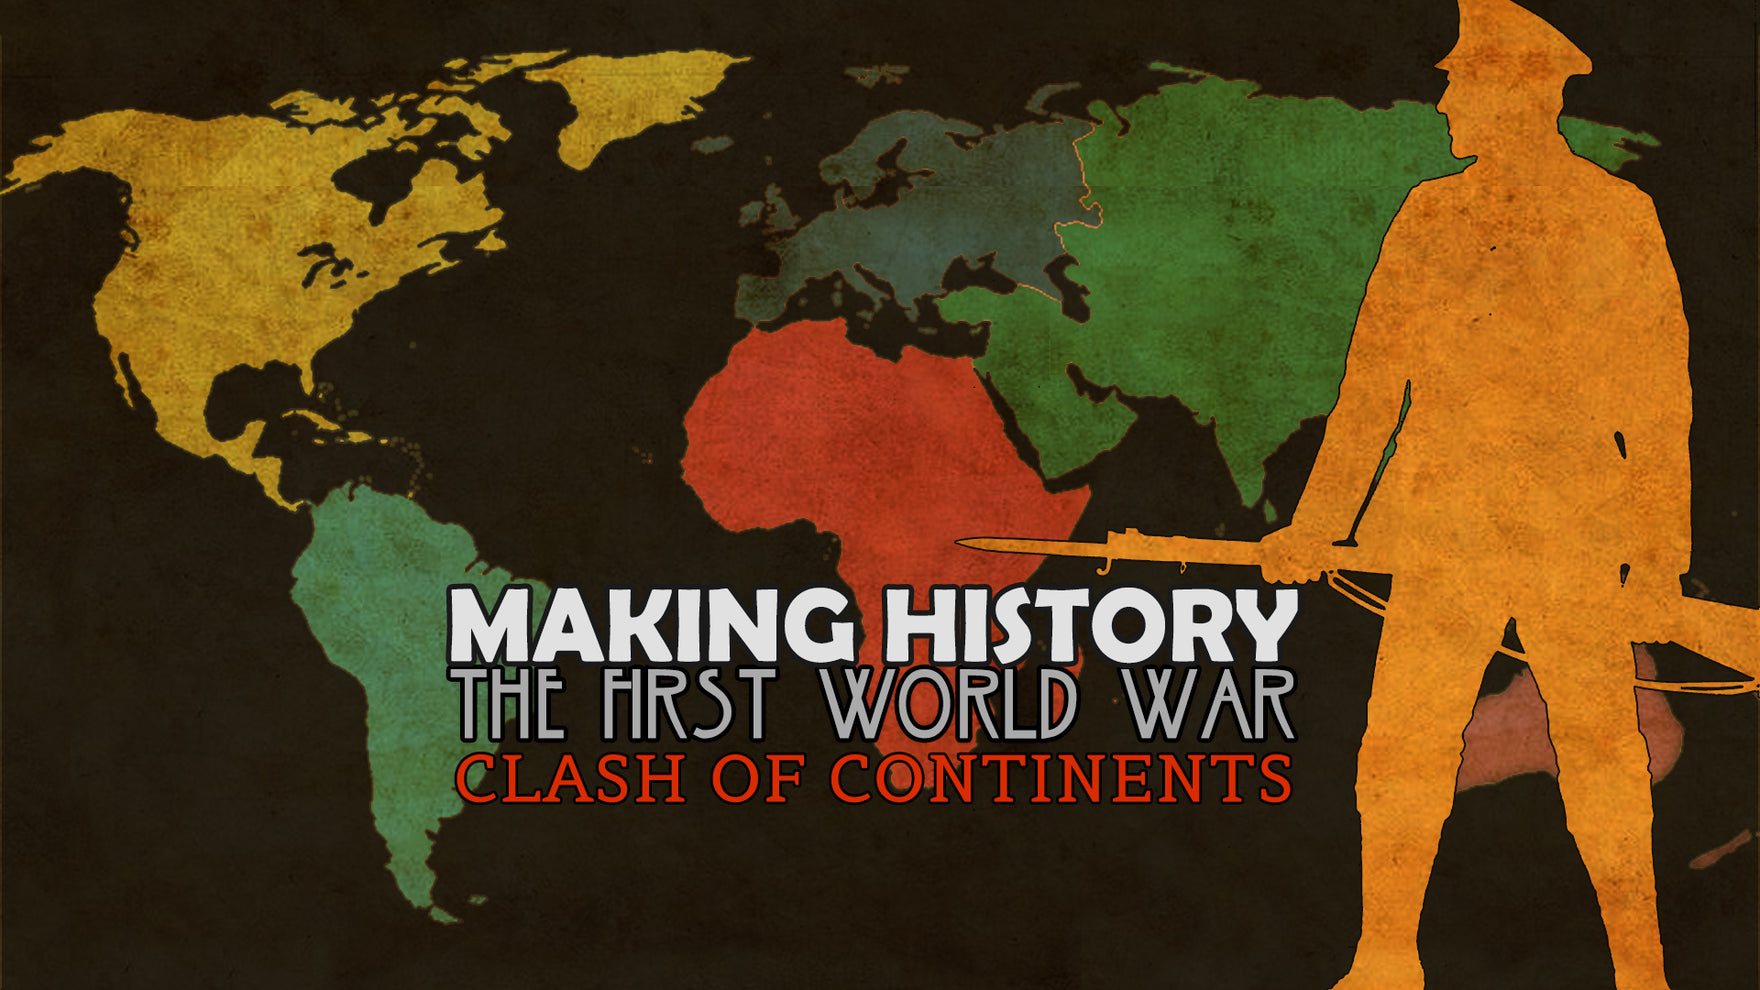 Making History: The First World War - Clash of Continents